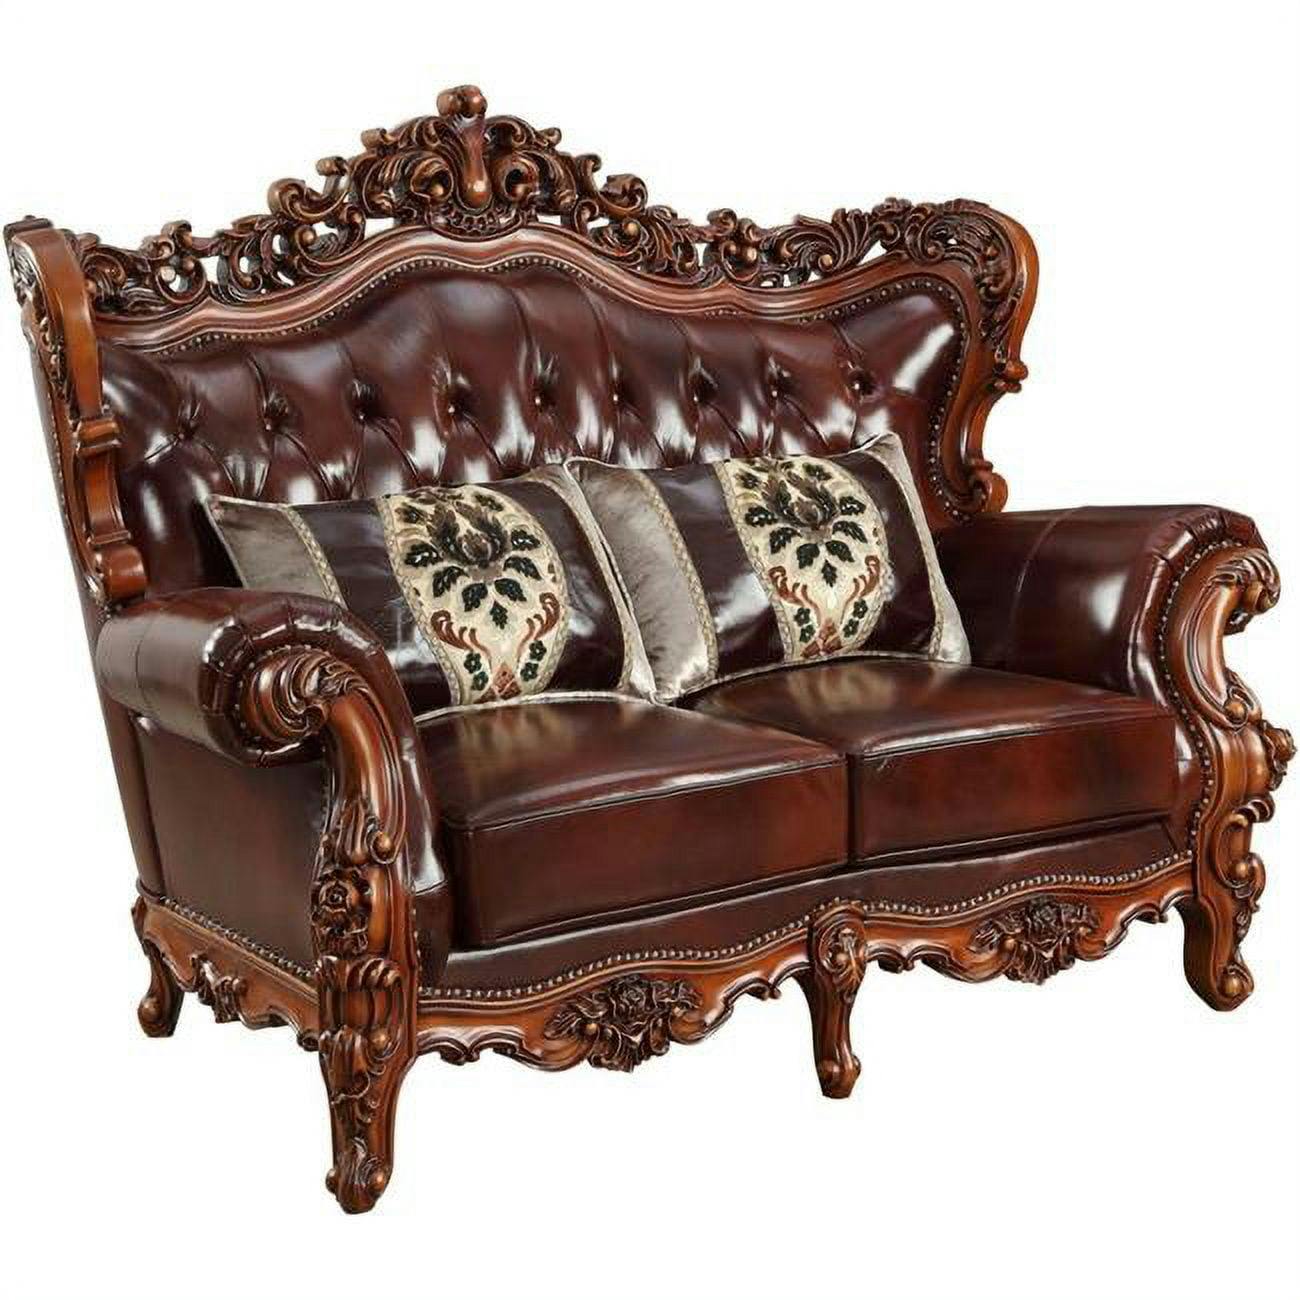 Elegant Cherry and Walnut Tufted Faux Leather Loveseat with Nailhead Detail